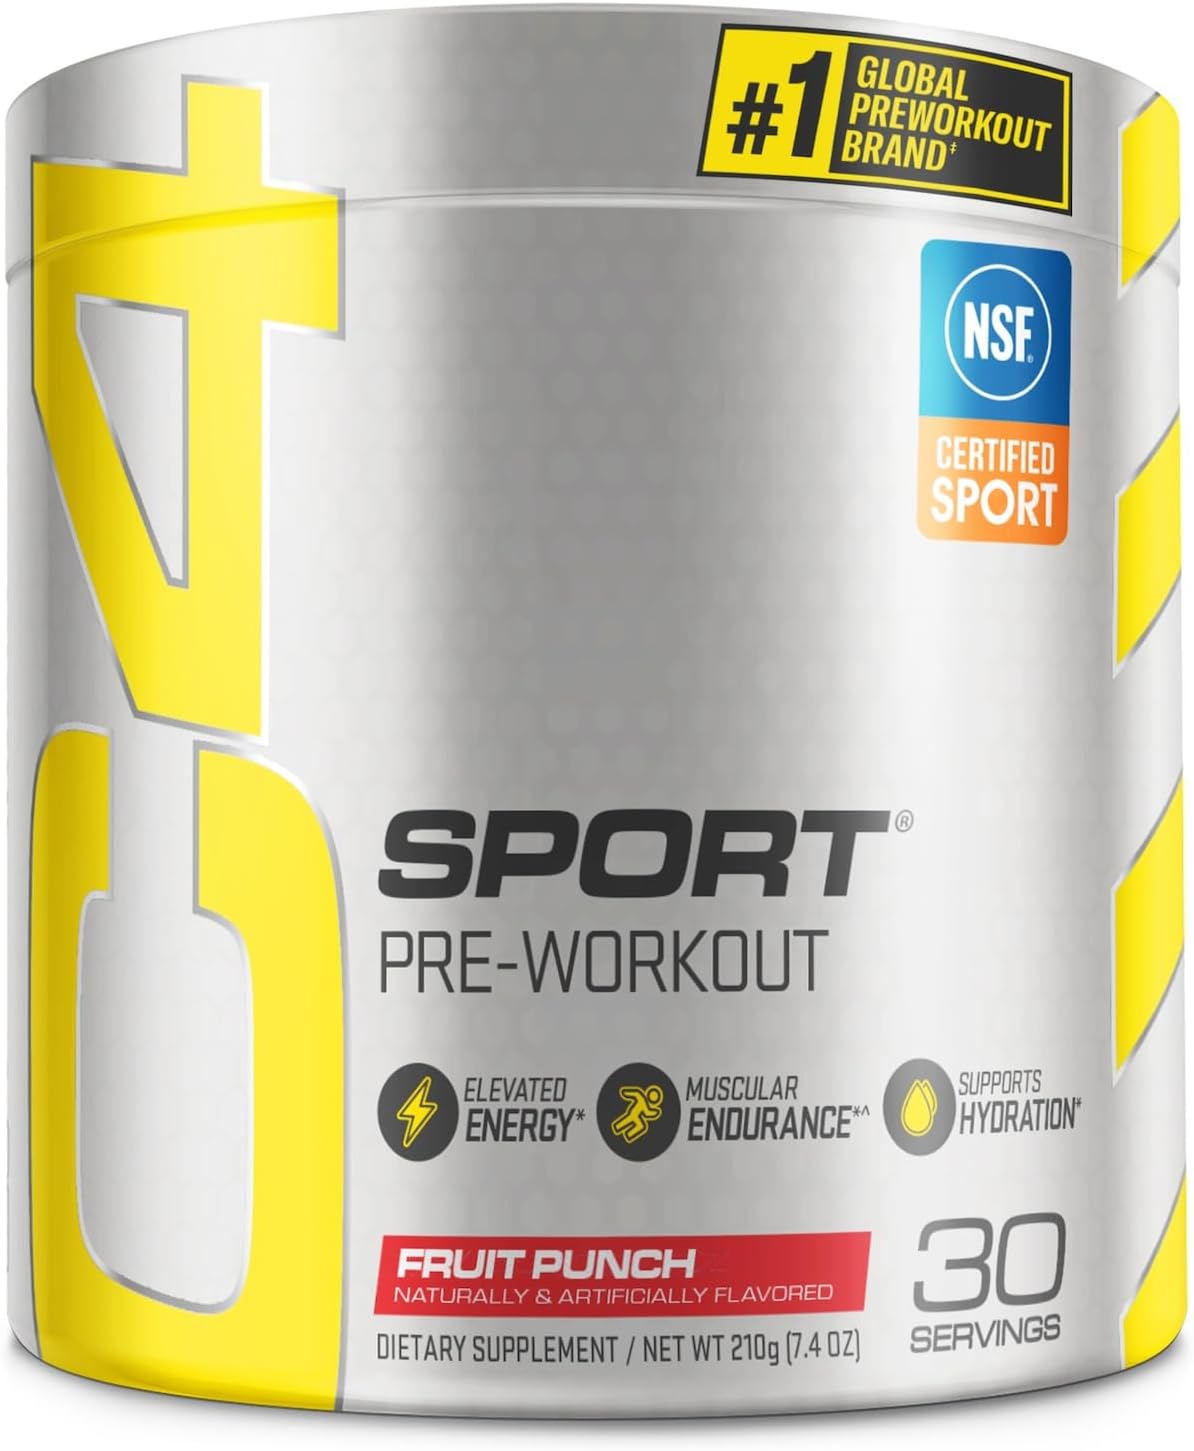 7.4-Oz Cellucor C4 Sport Pre Workout Powder (Fruit Punch) $14.25 w/ S&S + Free Shipping w/ Prime or on $35+